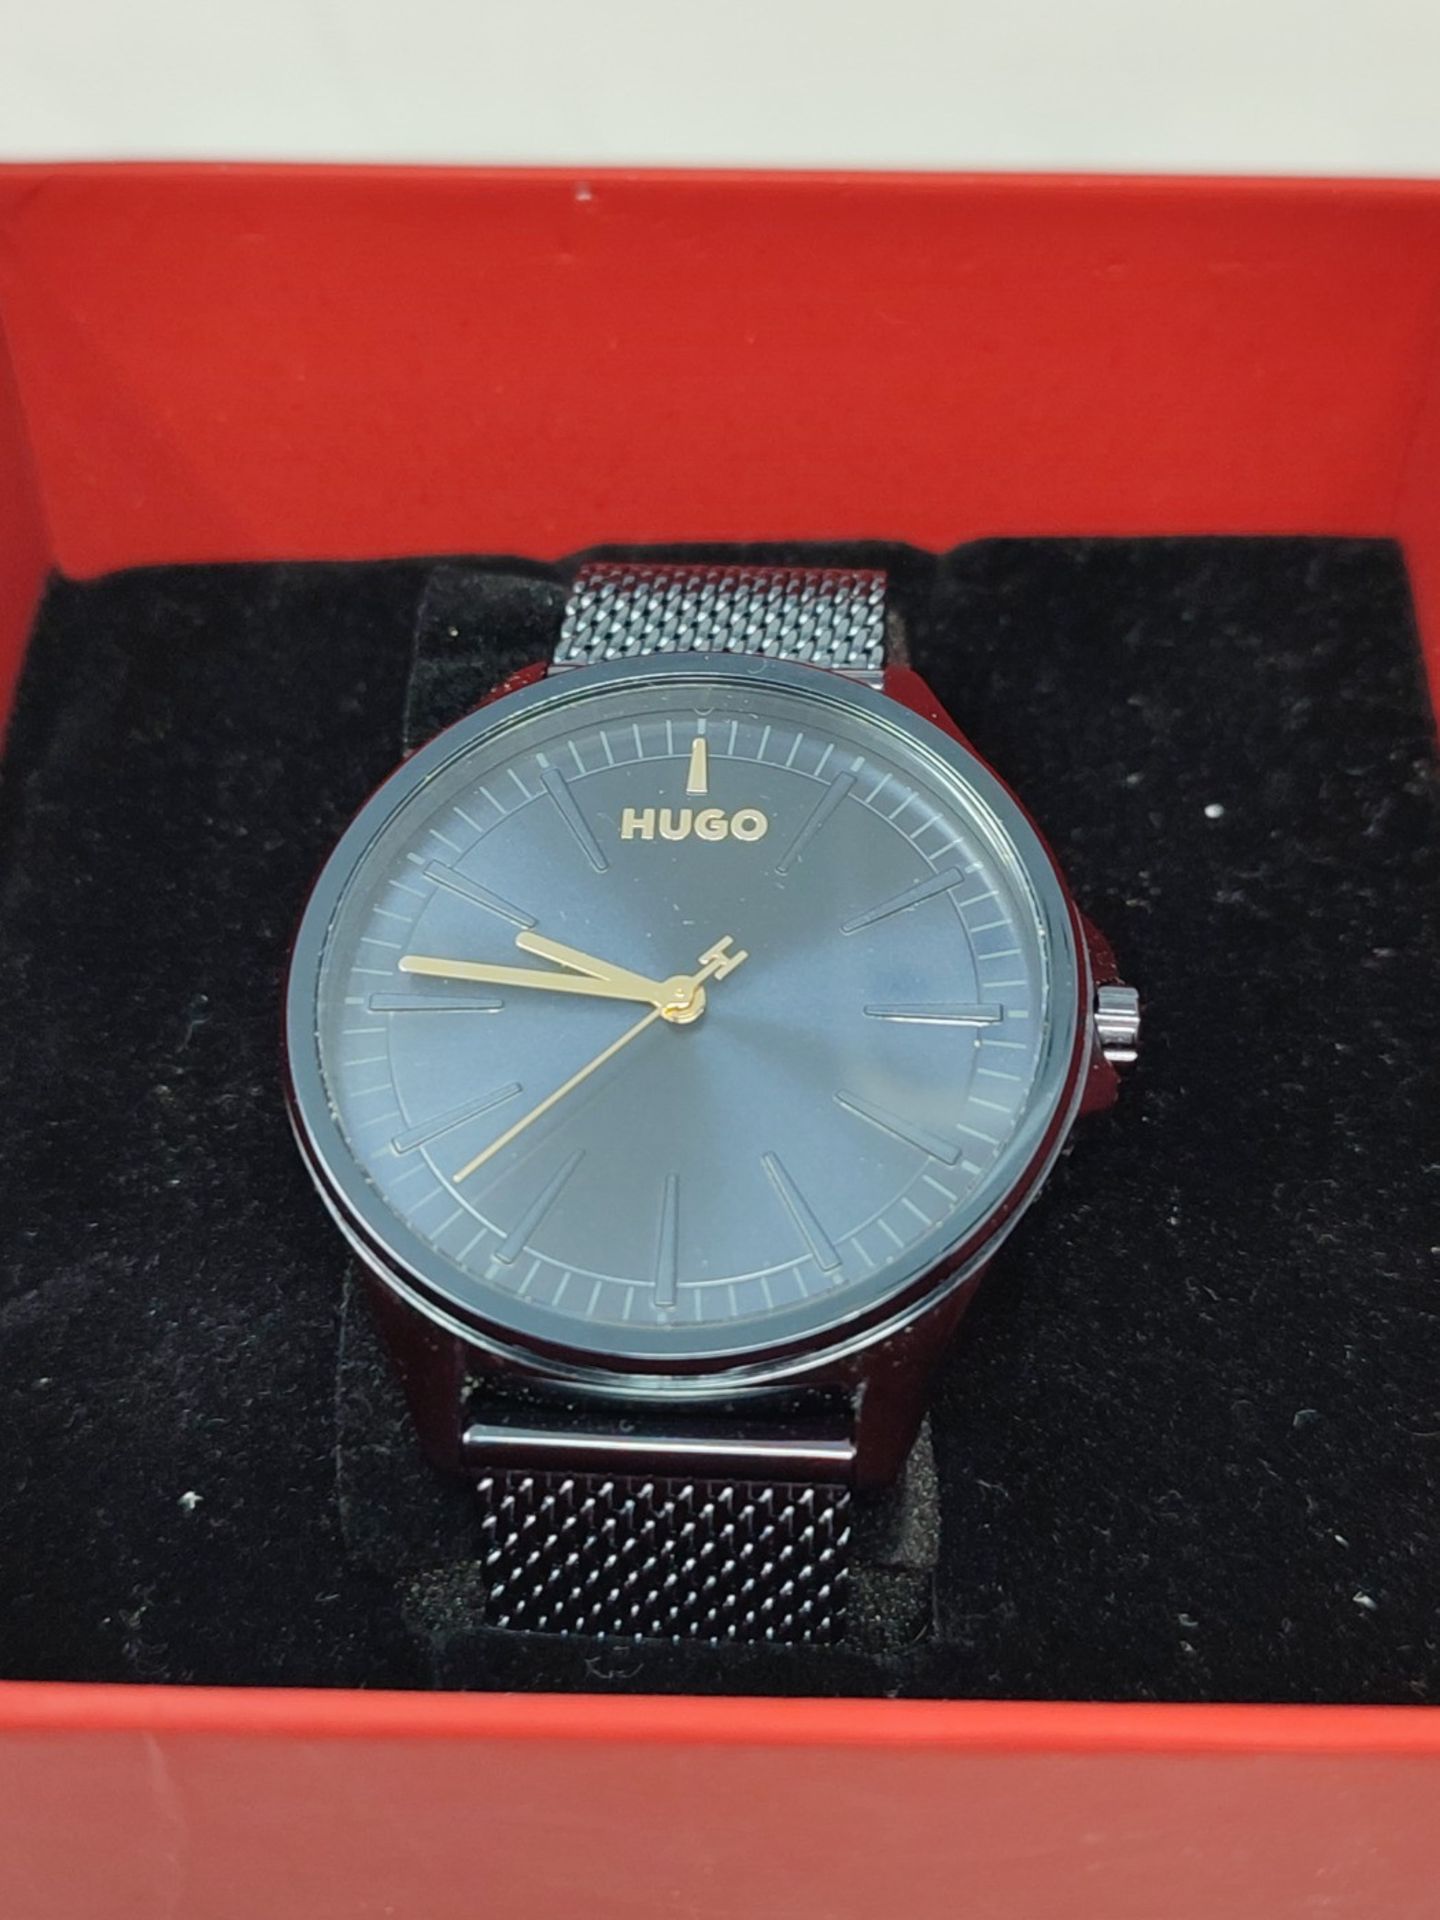 RRP £149.00 HUGO Men's Analogue Quartz Watch with Stainless Steel Strap 1530136 - Image 3 of 3